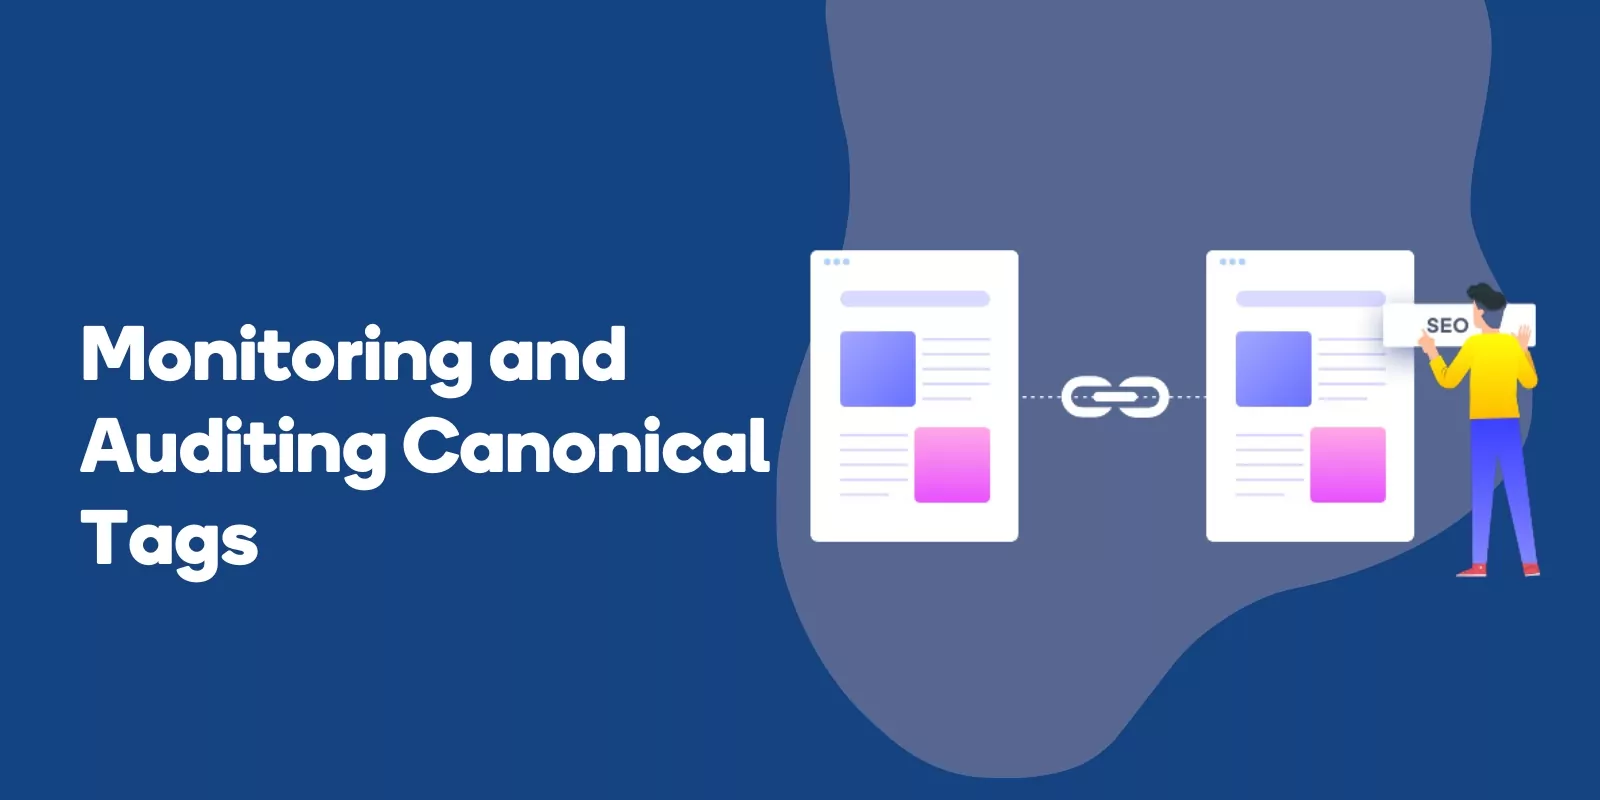 Monitoring and Auditing Canonical Tags